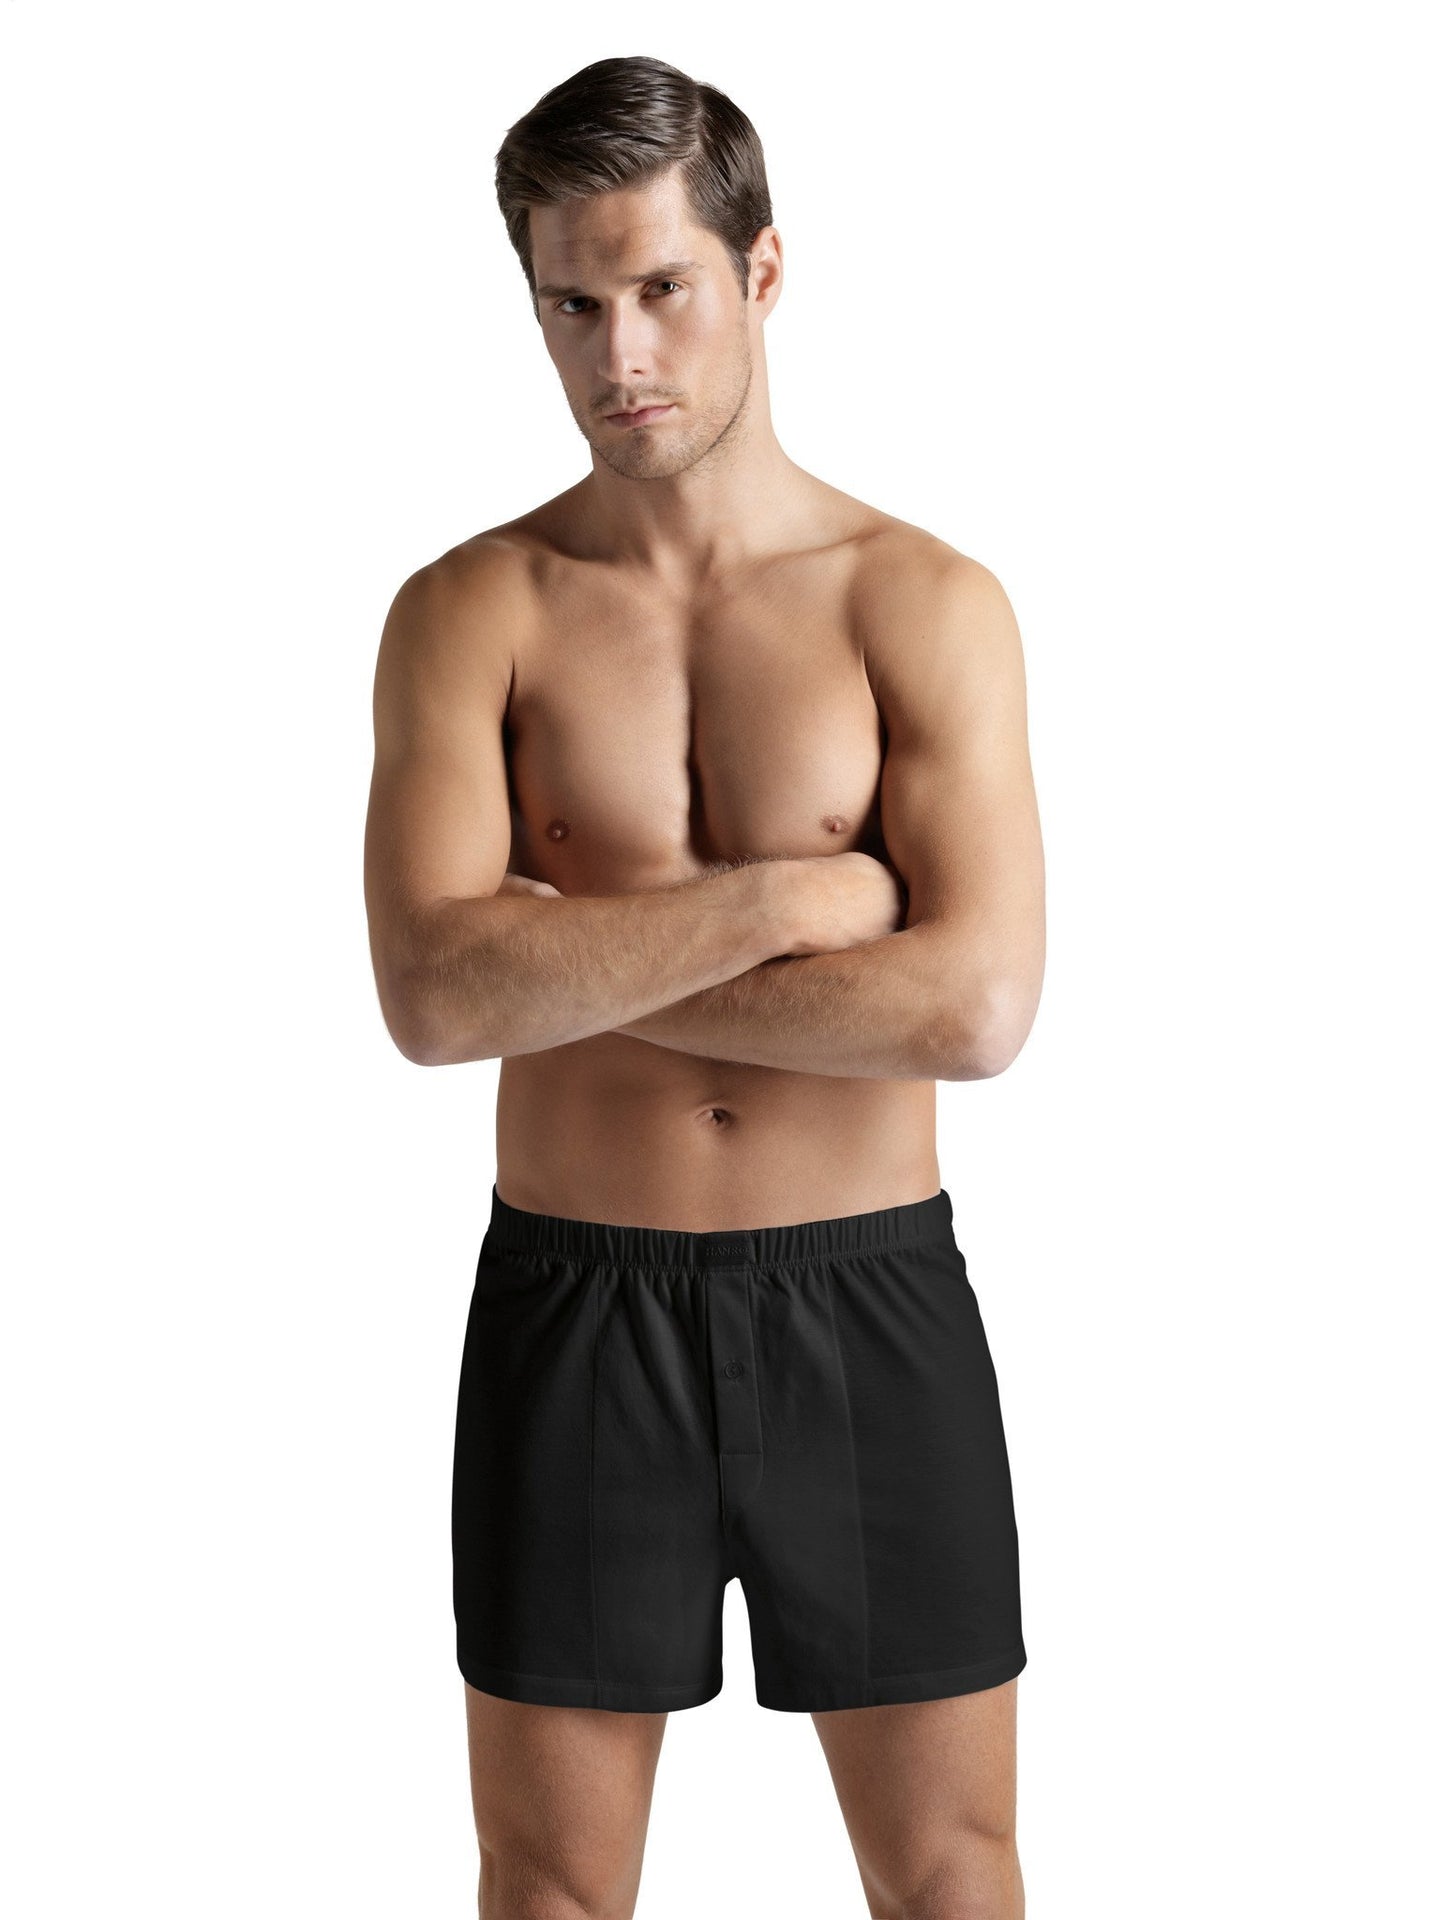 100% Pure Cotton loose fitting boxer shorts with buttoned fly.  Available in Black, Midnight Navy and White.   Fabric Content: 100% Mercerised Cotton. Made in Europe.